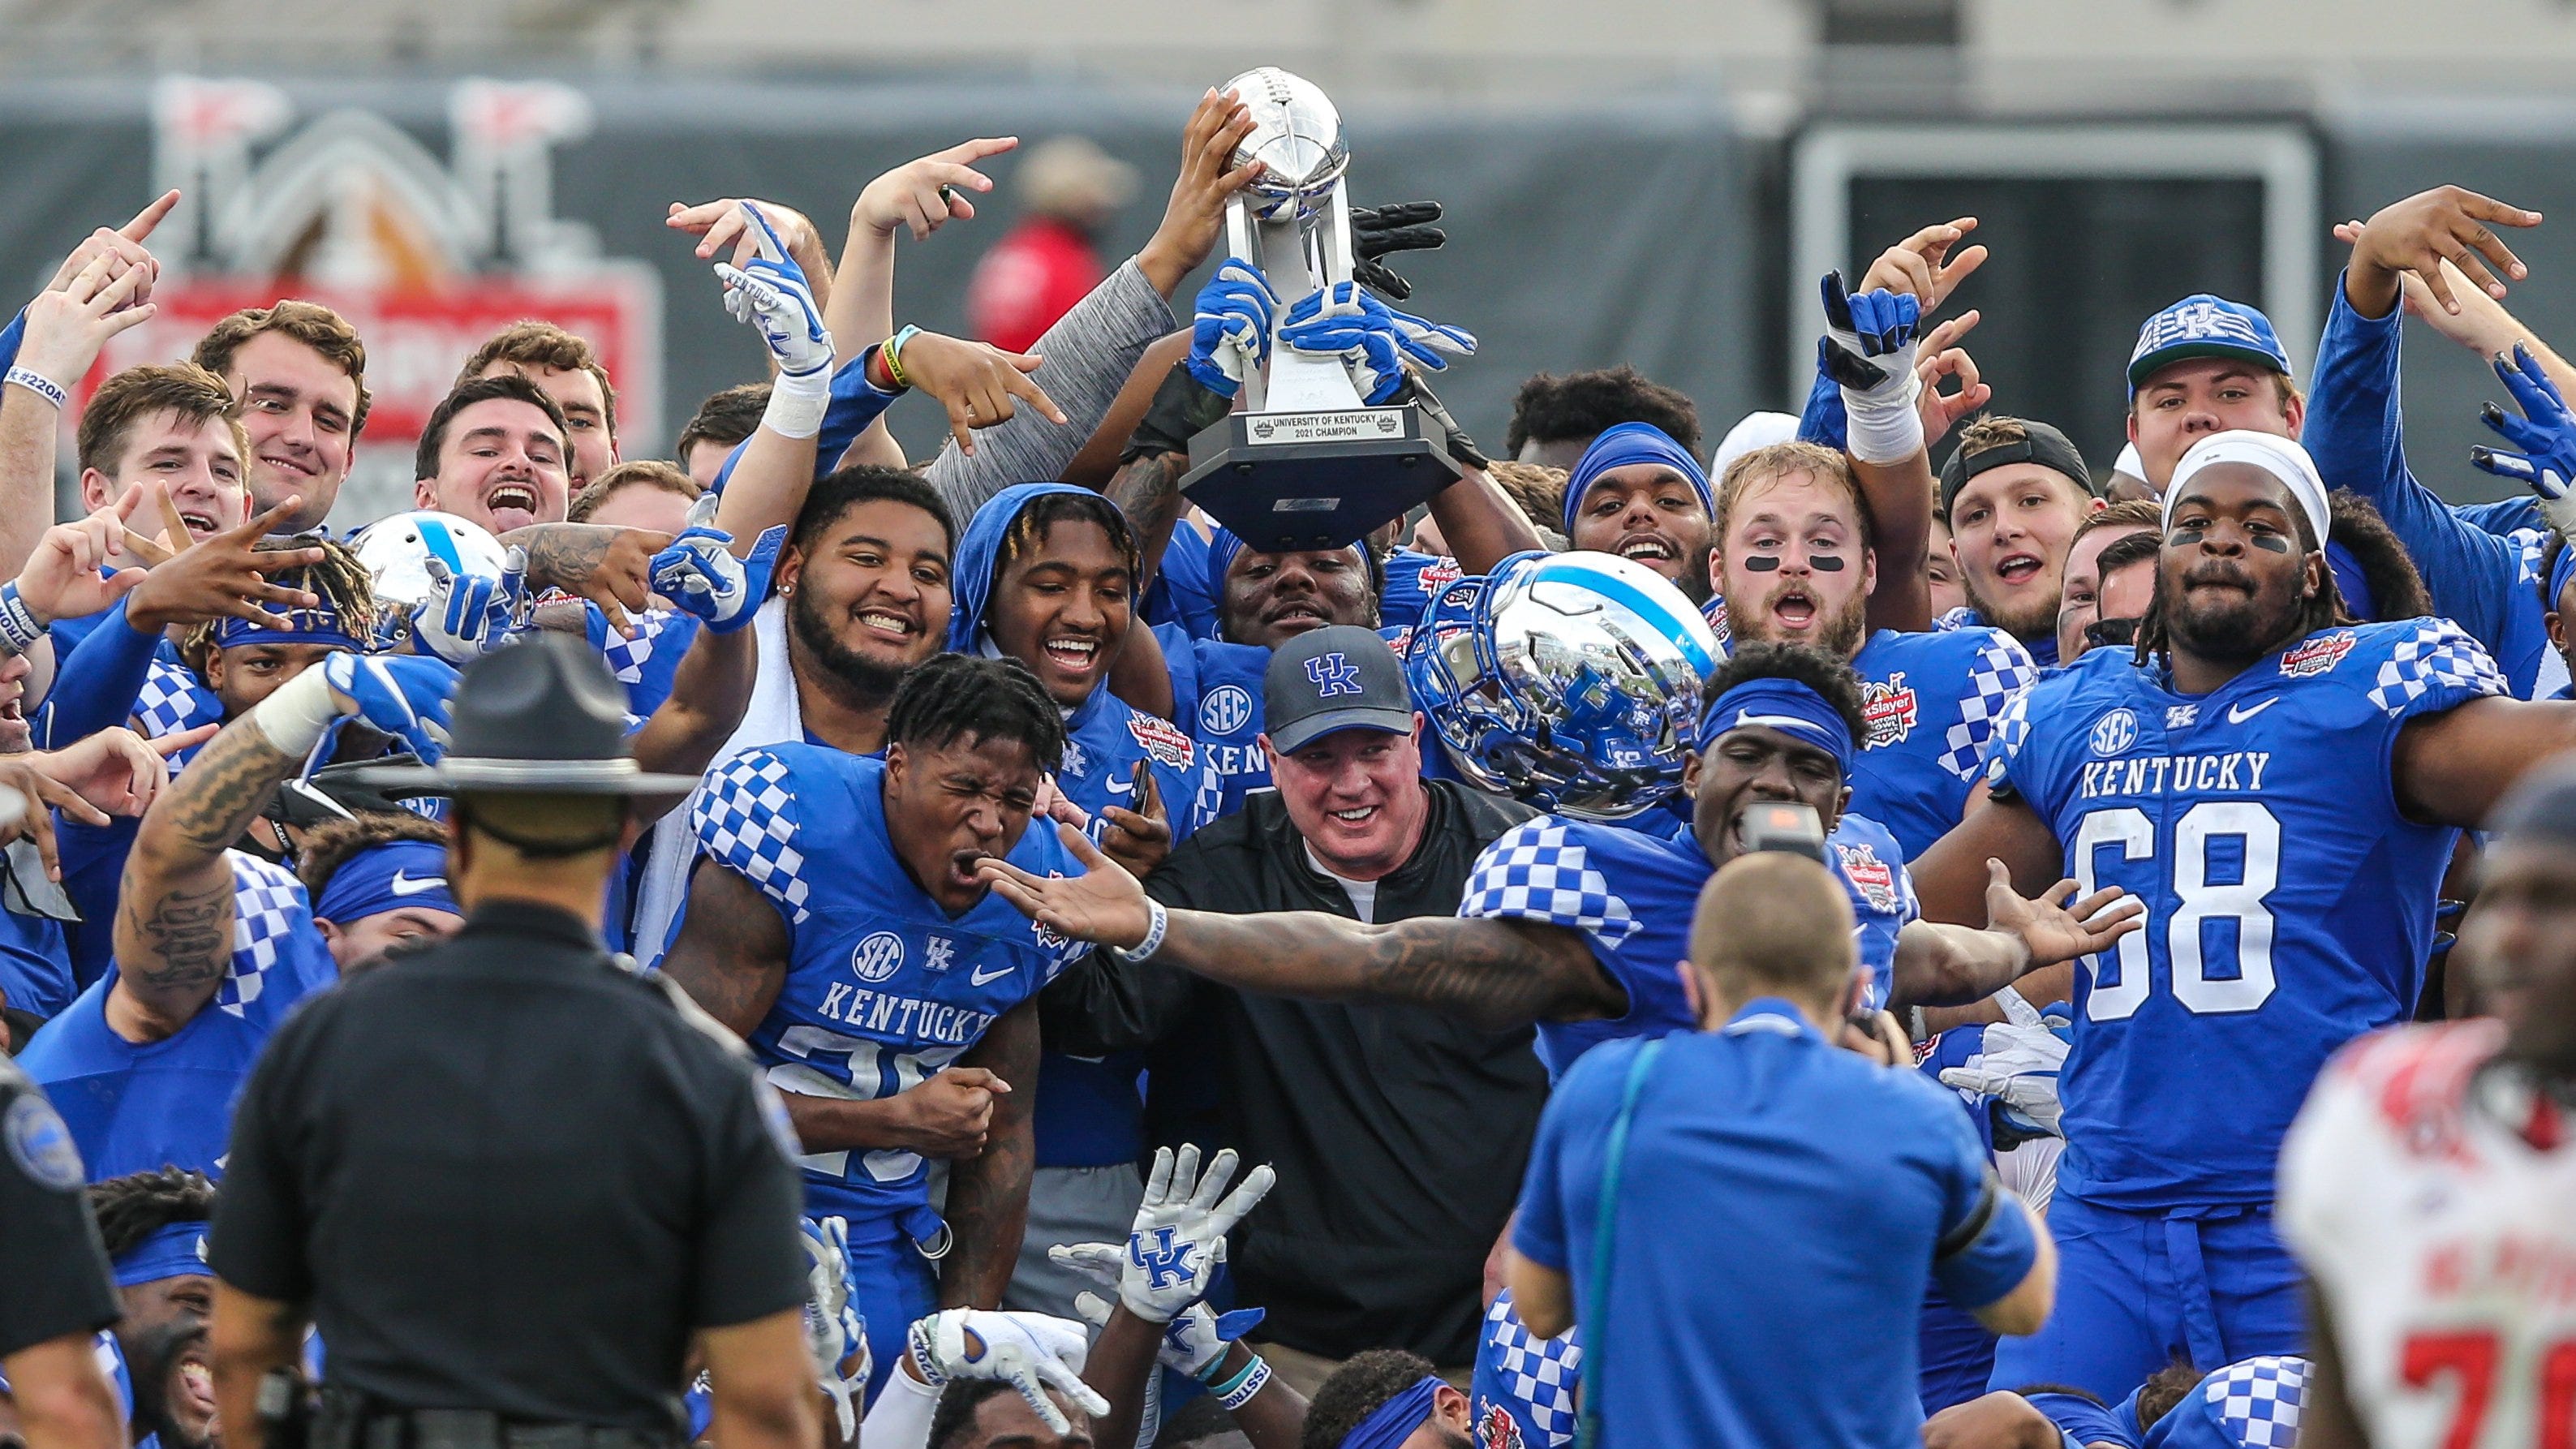 2021 Kentucky football schedule: Dates for every UK game